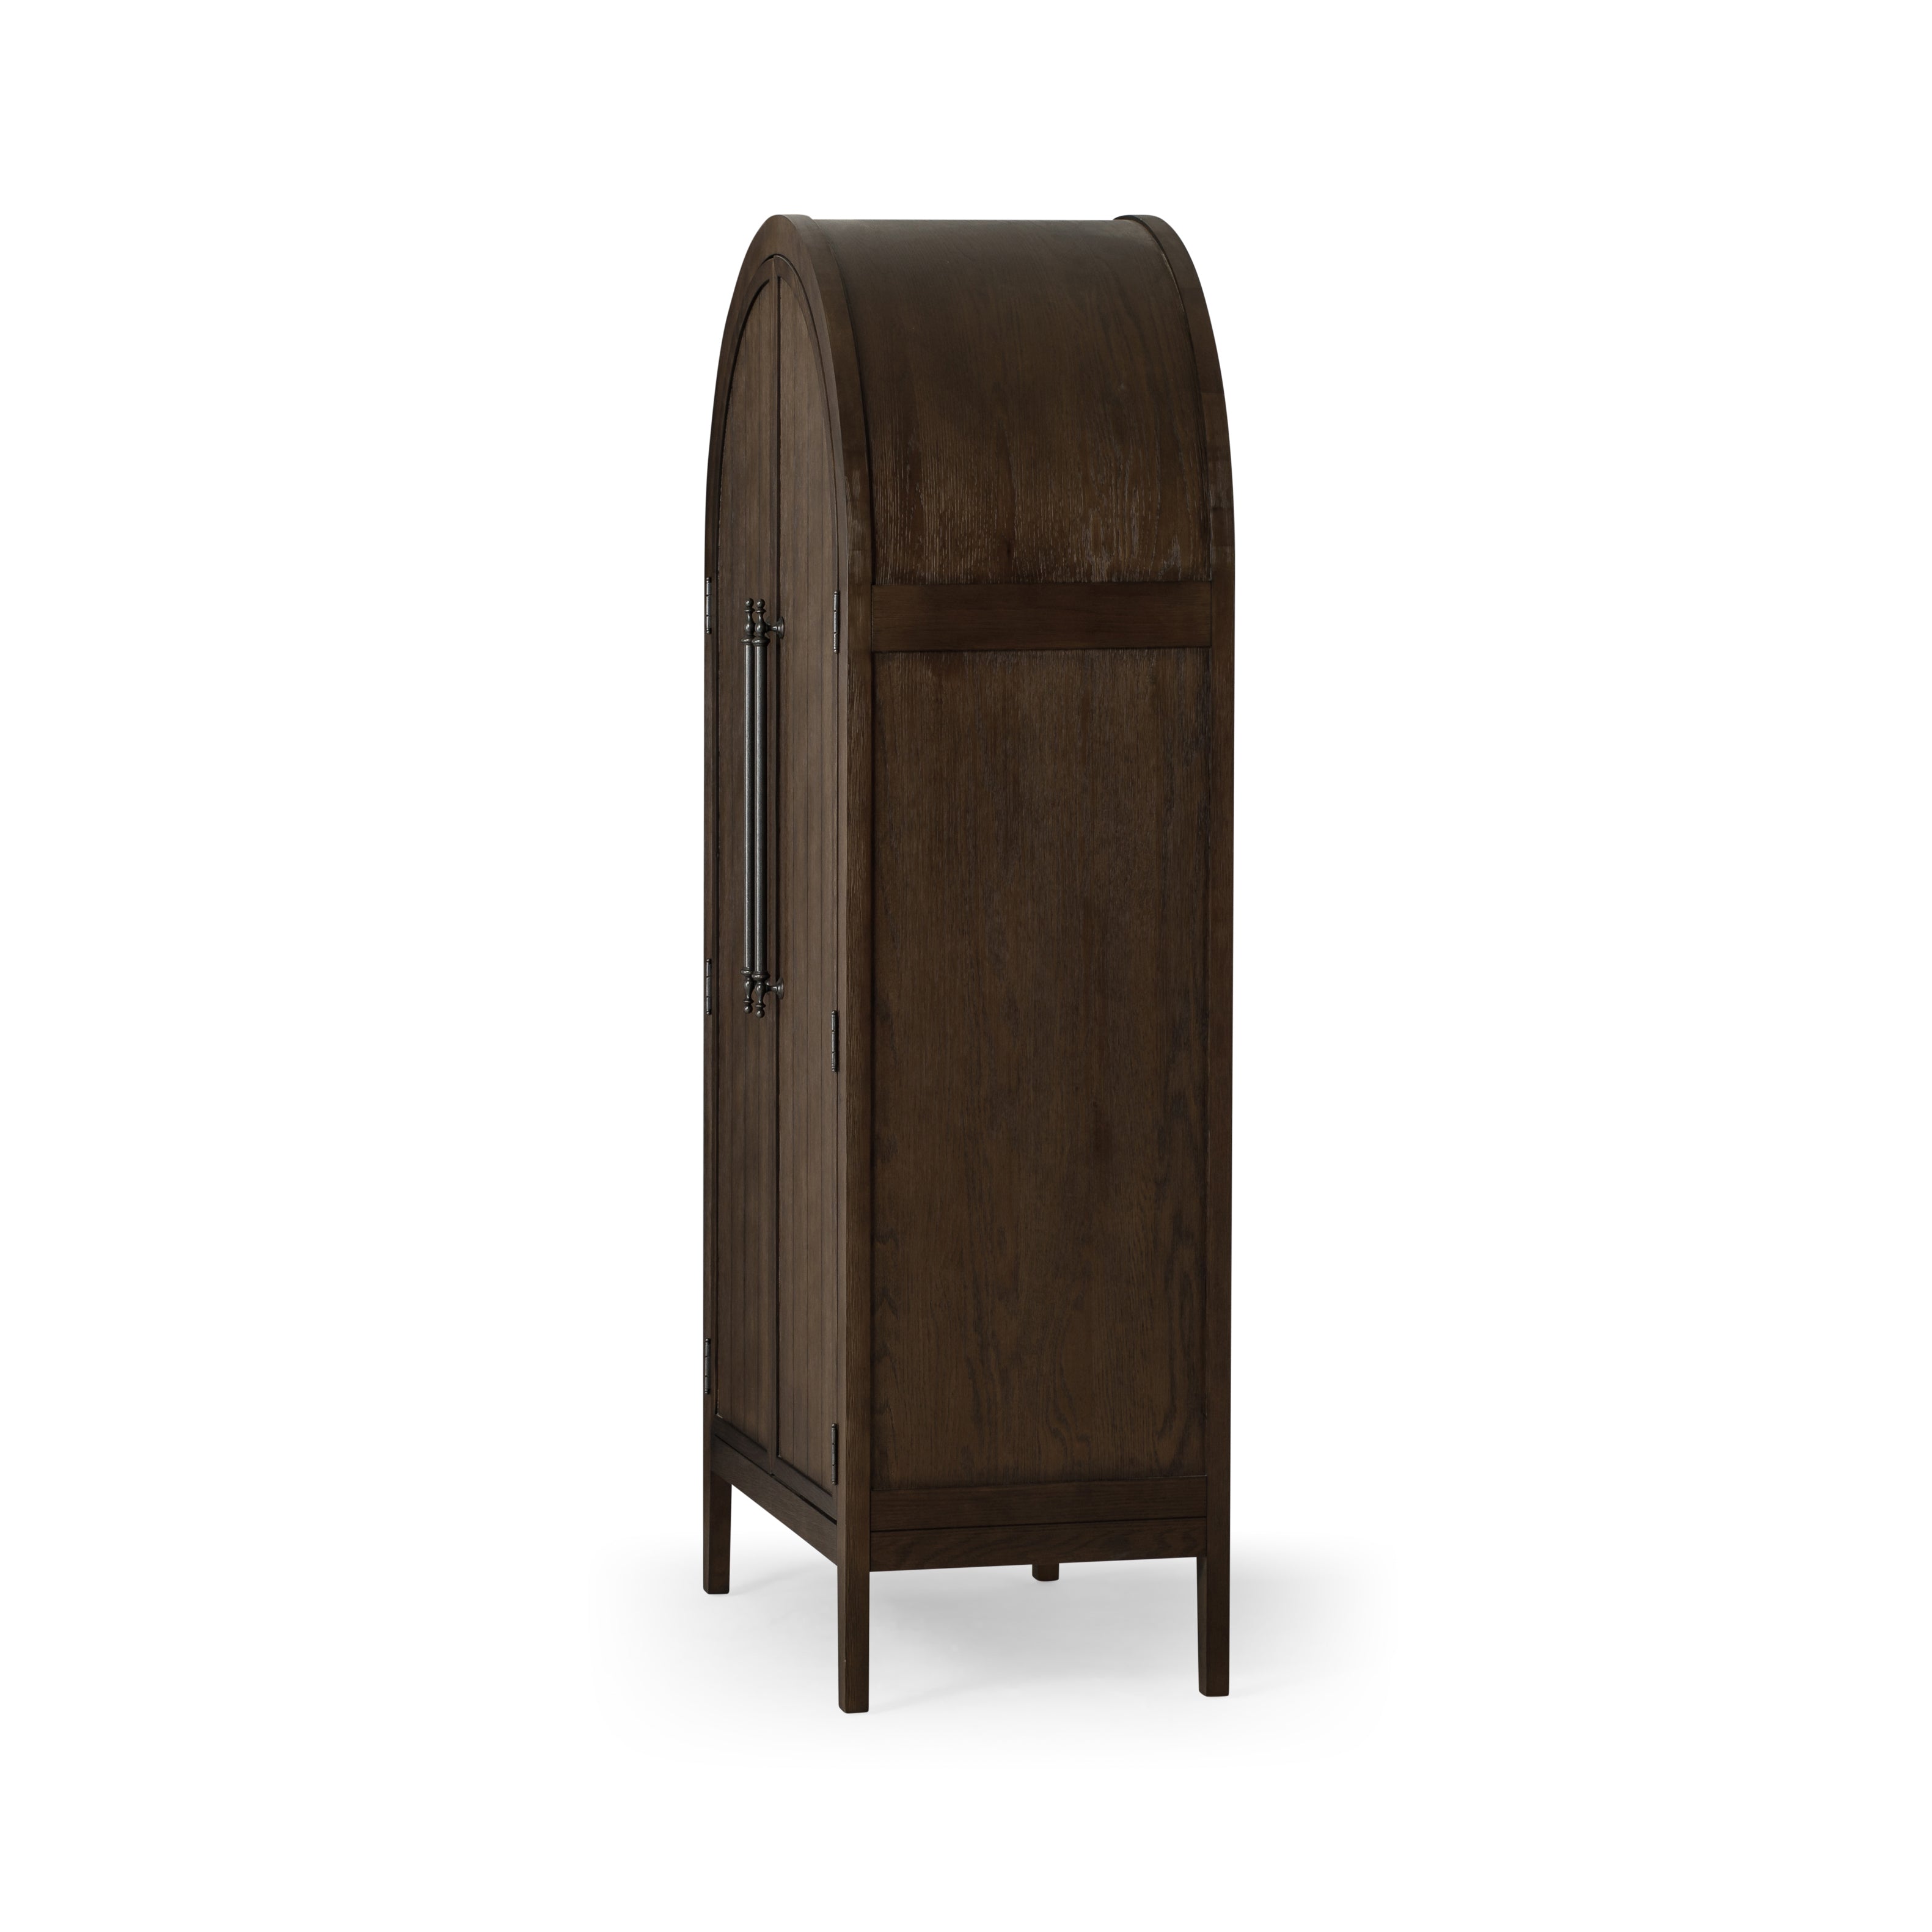 Selene Classical Wooden Cabinet in Antiqued Brown Finish in Cabinets by Maven Lane